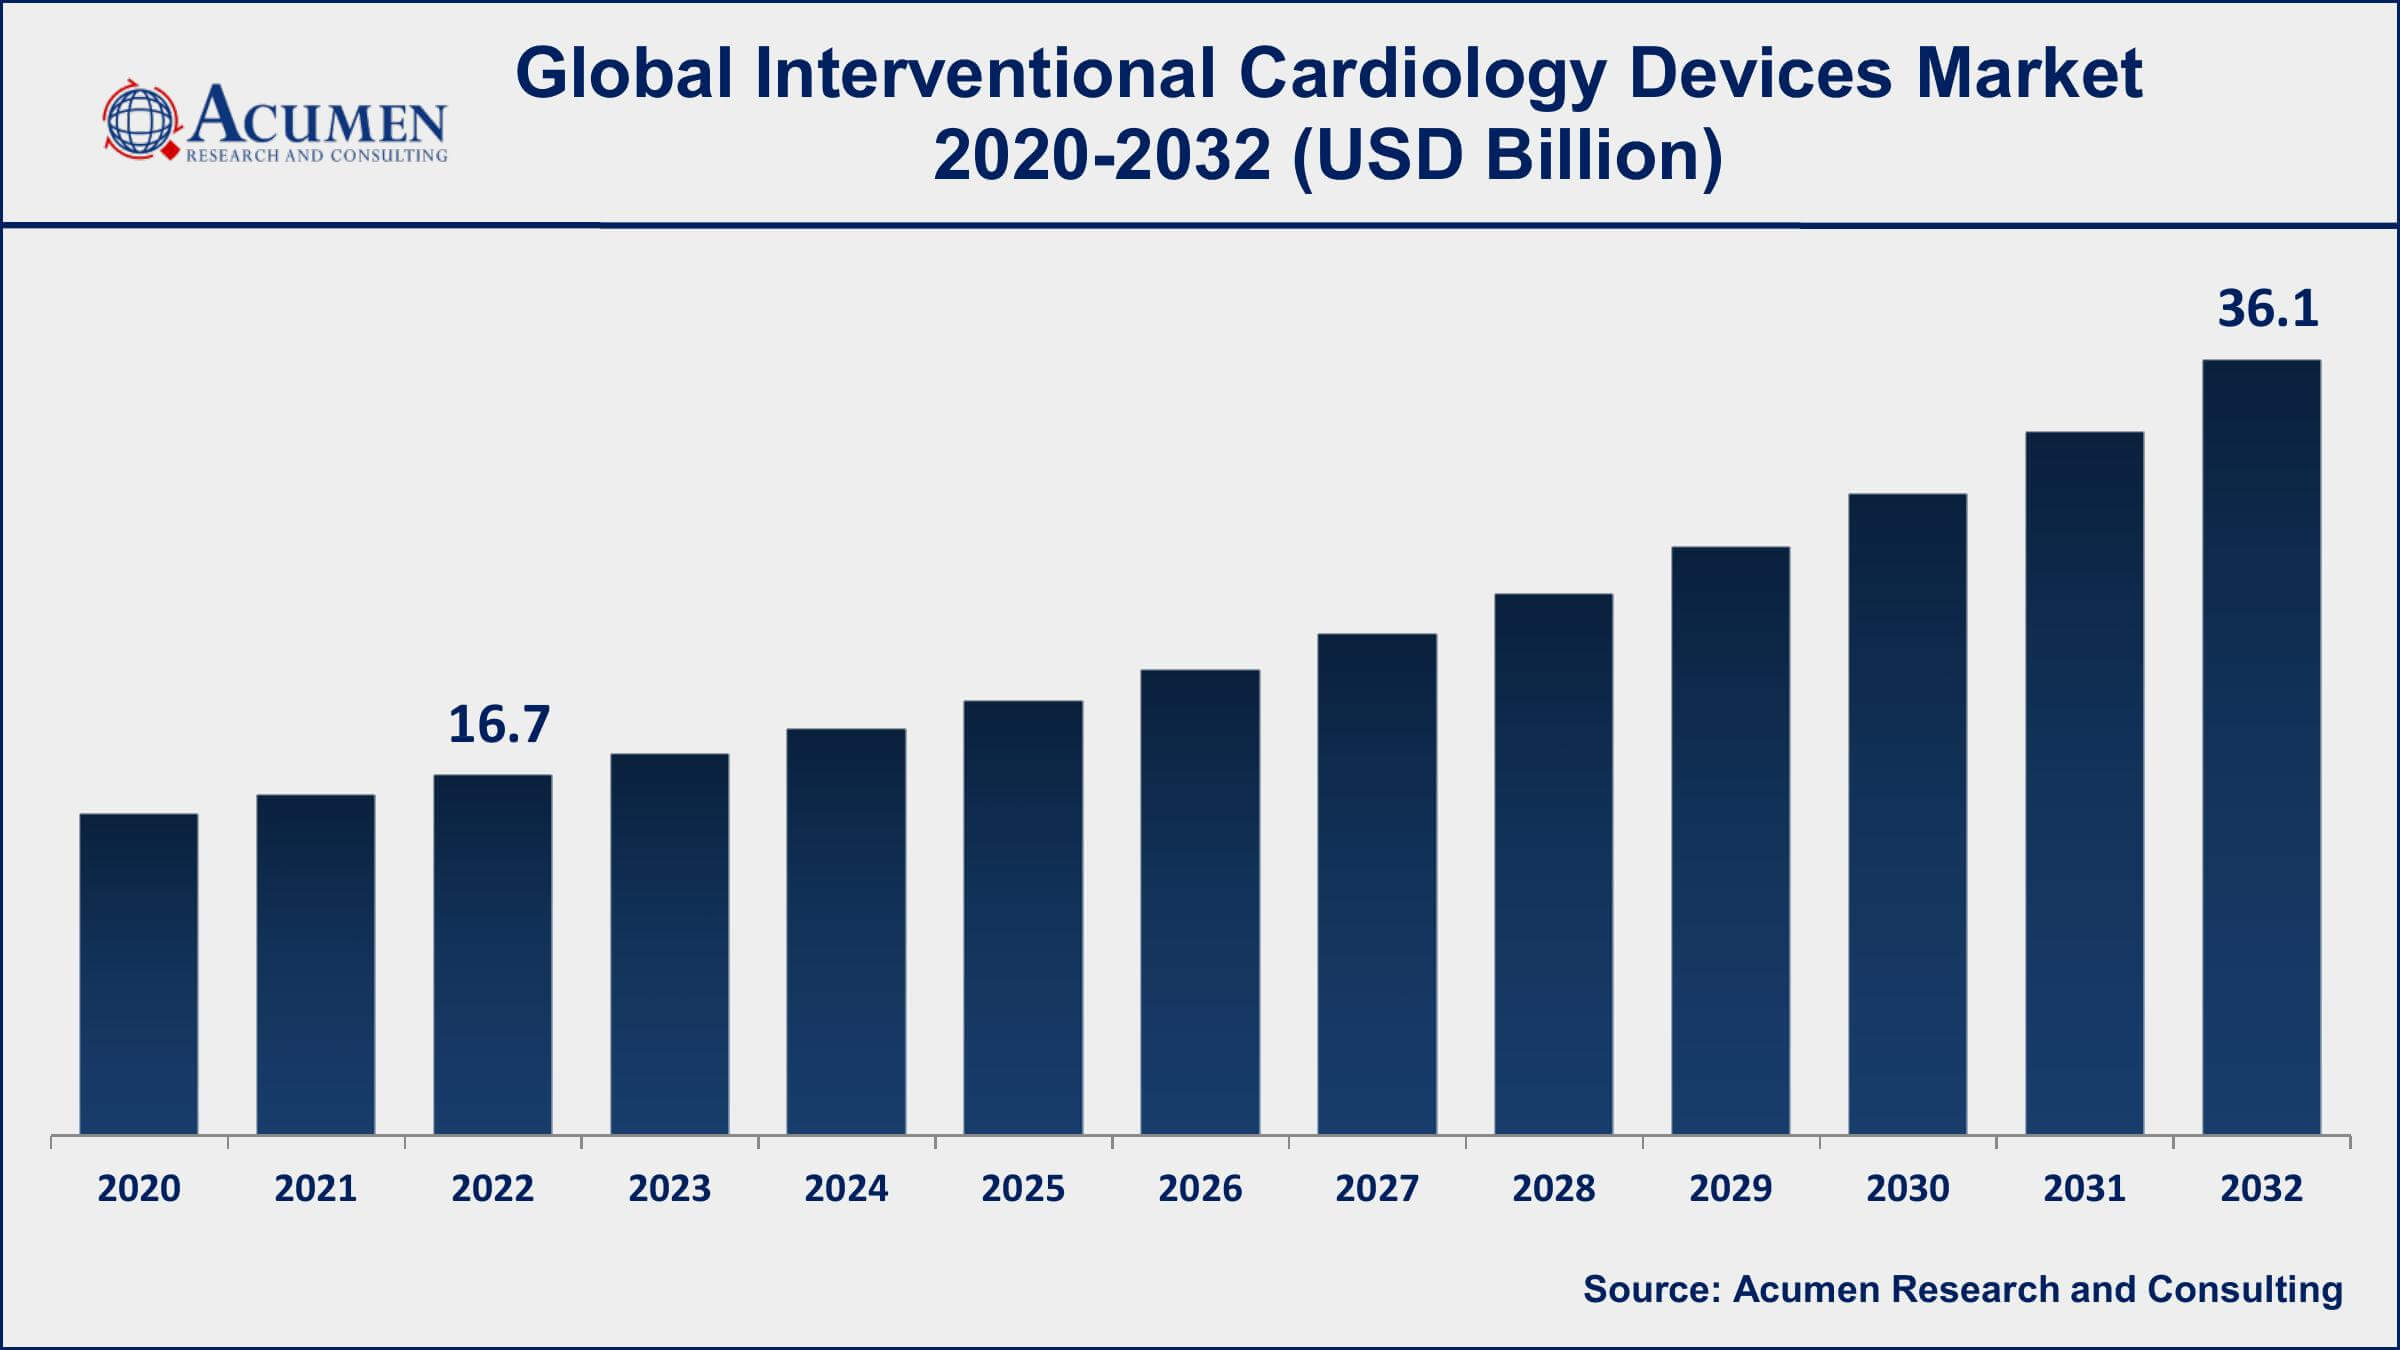 Interventional Cardiology Devices Market Dynamics